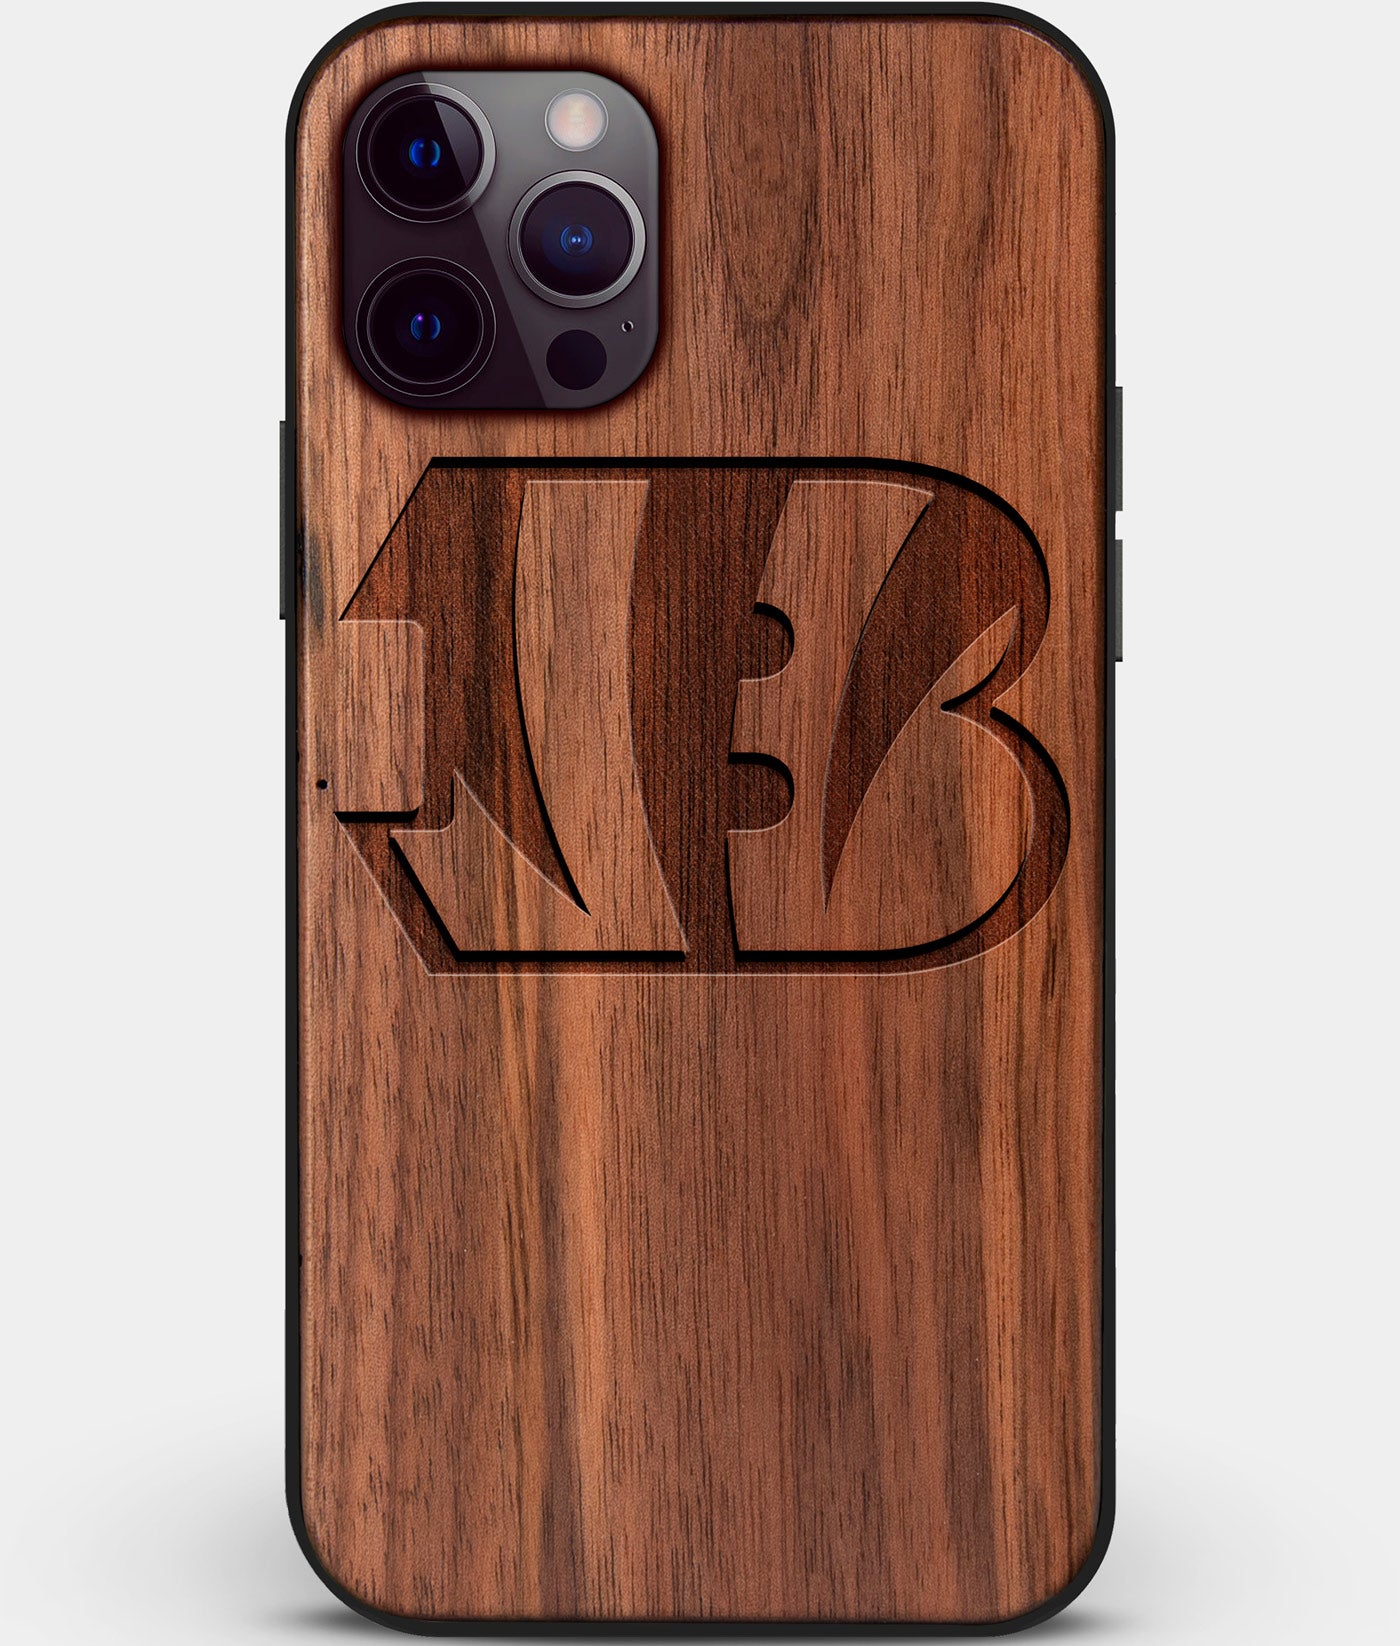 Custom Carved Wood Cincinnati Bengals iPhone 12 Pro Case | Personalized Walnut Wood Cincinnati Bengals Cover, Birthday Gift, Gifts For Him, Monogrammed Gift For Fan | by Engraved In Nature